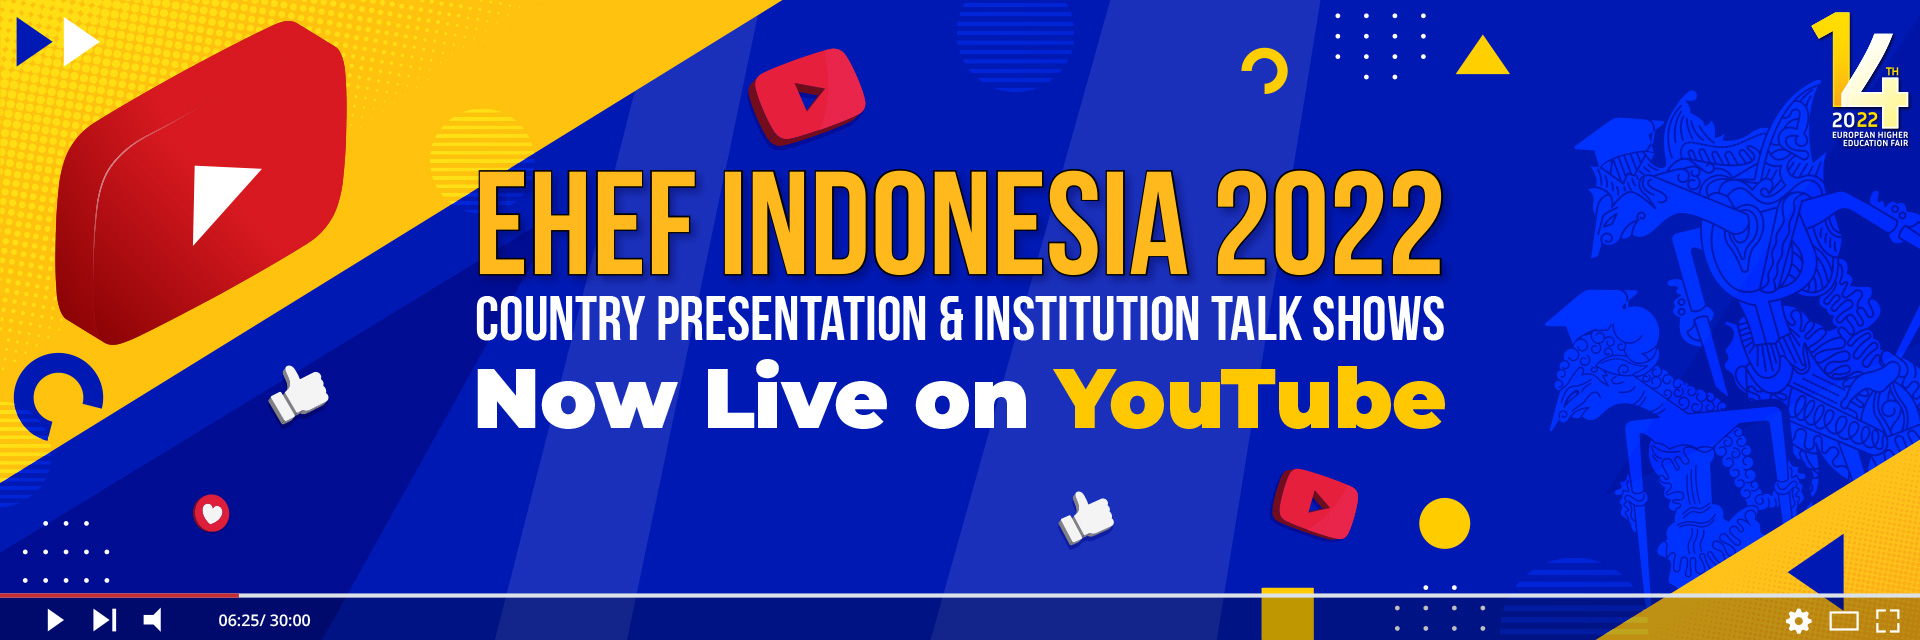 EHEF Indonesia 2022 Country Presentation and Talkshow Ready in YouTube